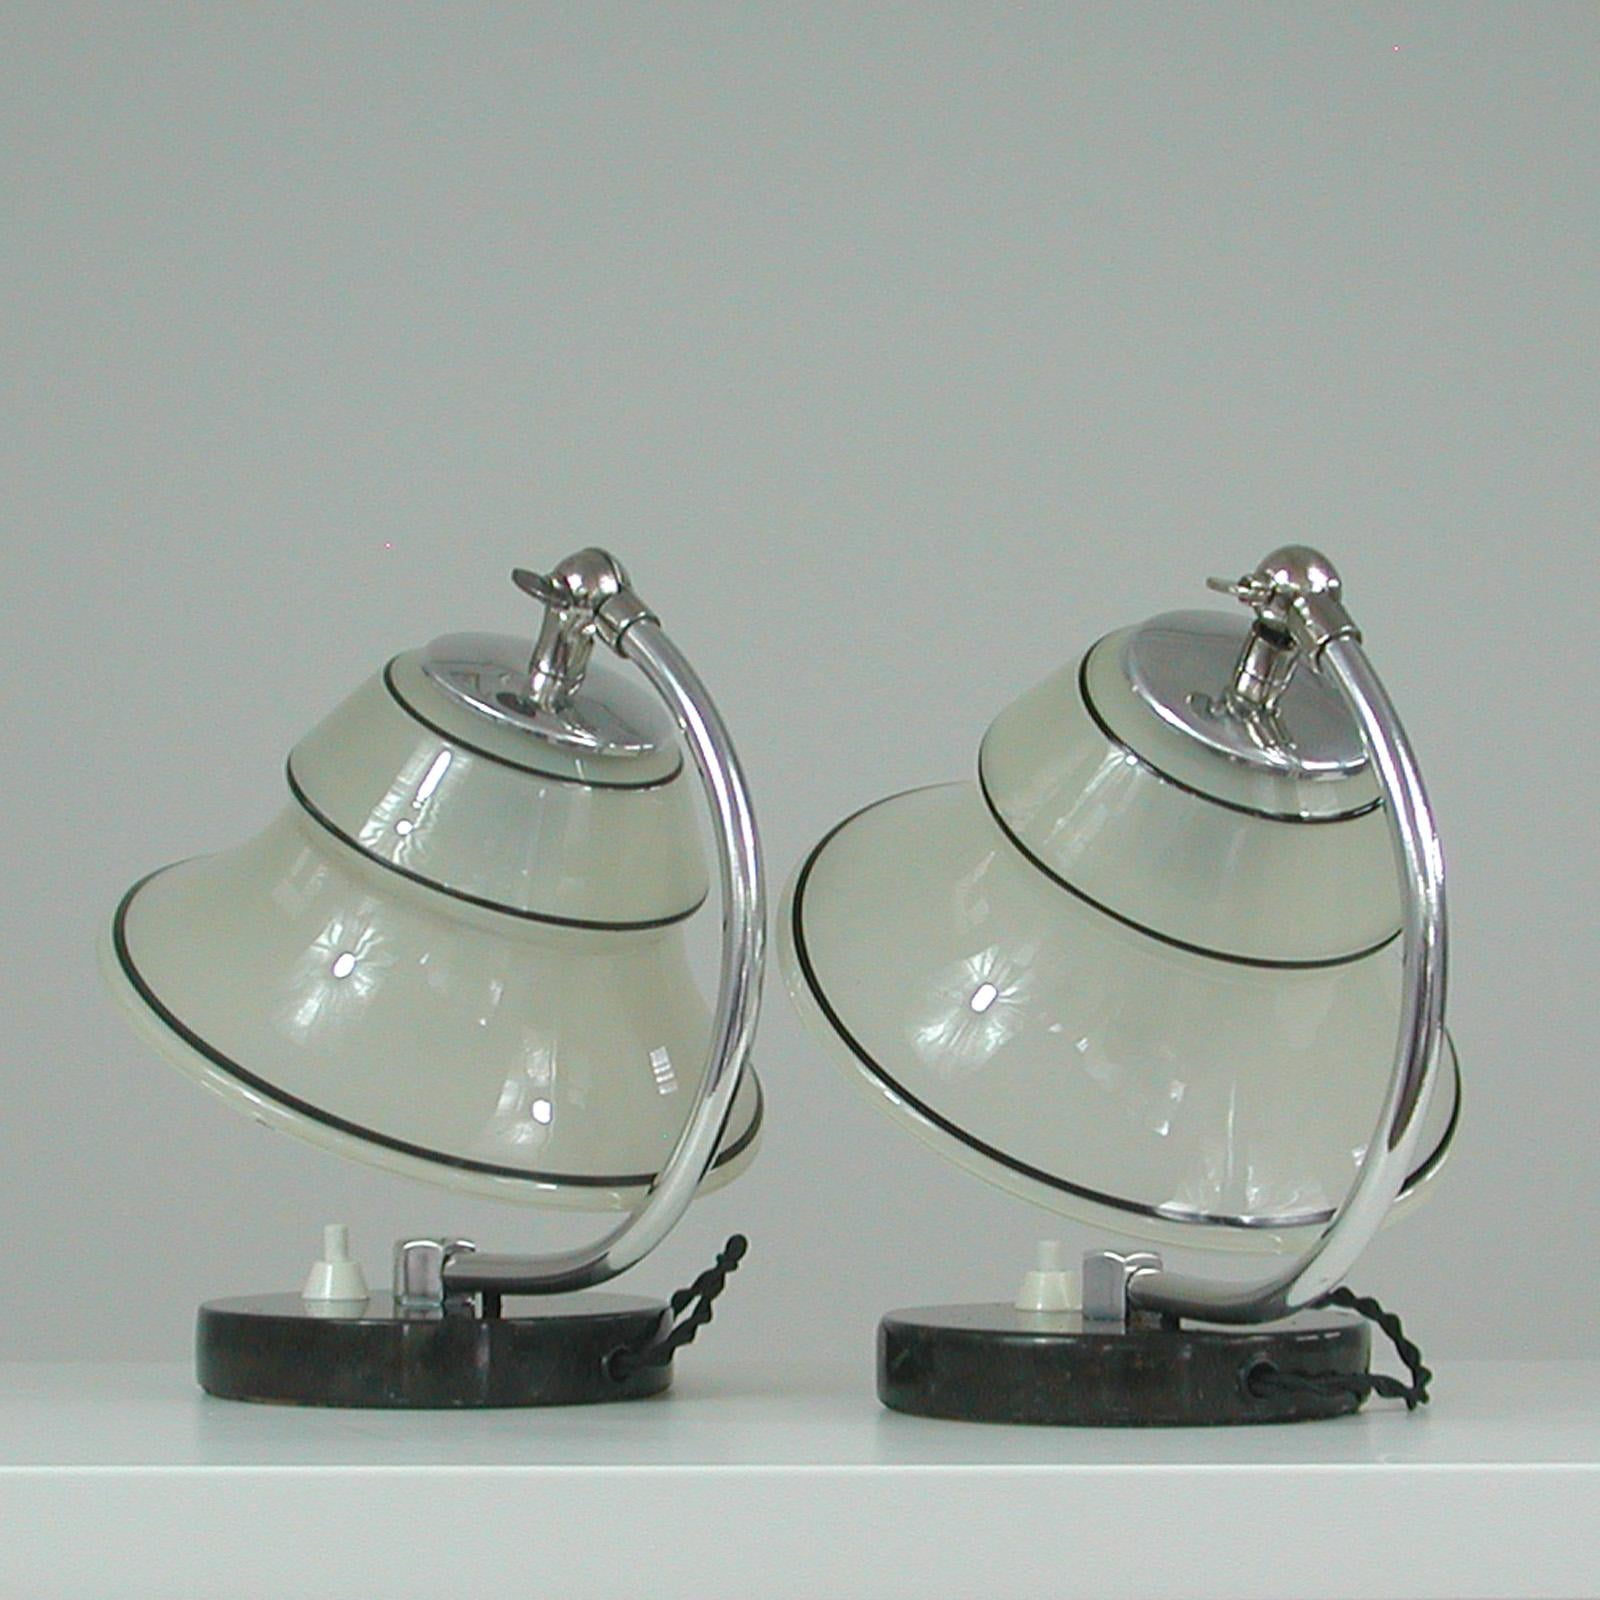 German Art Deco Enameled Satin Glass, Marble and Aluminum Table Lamps, 1930s For Sale 6